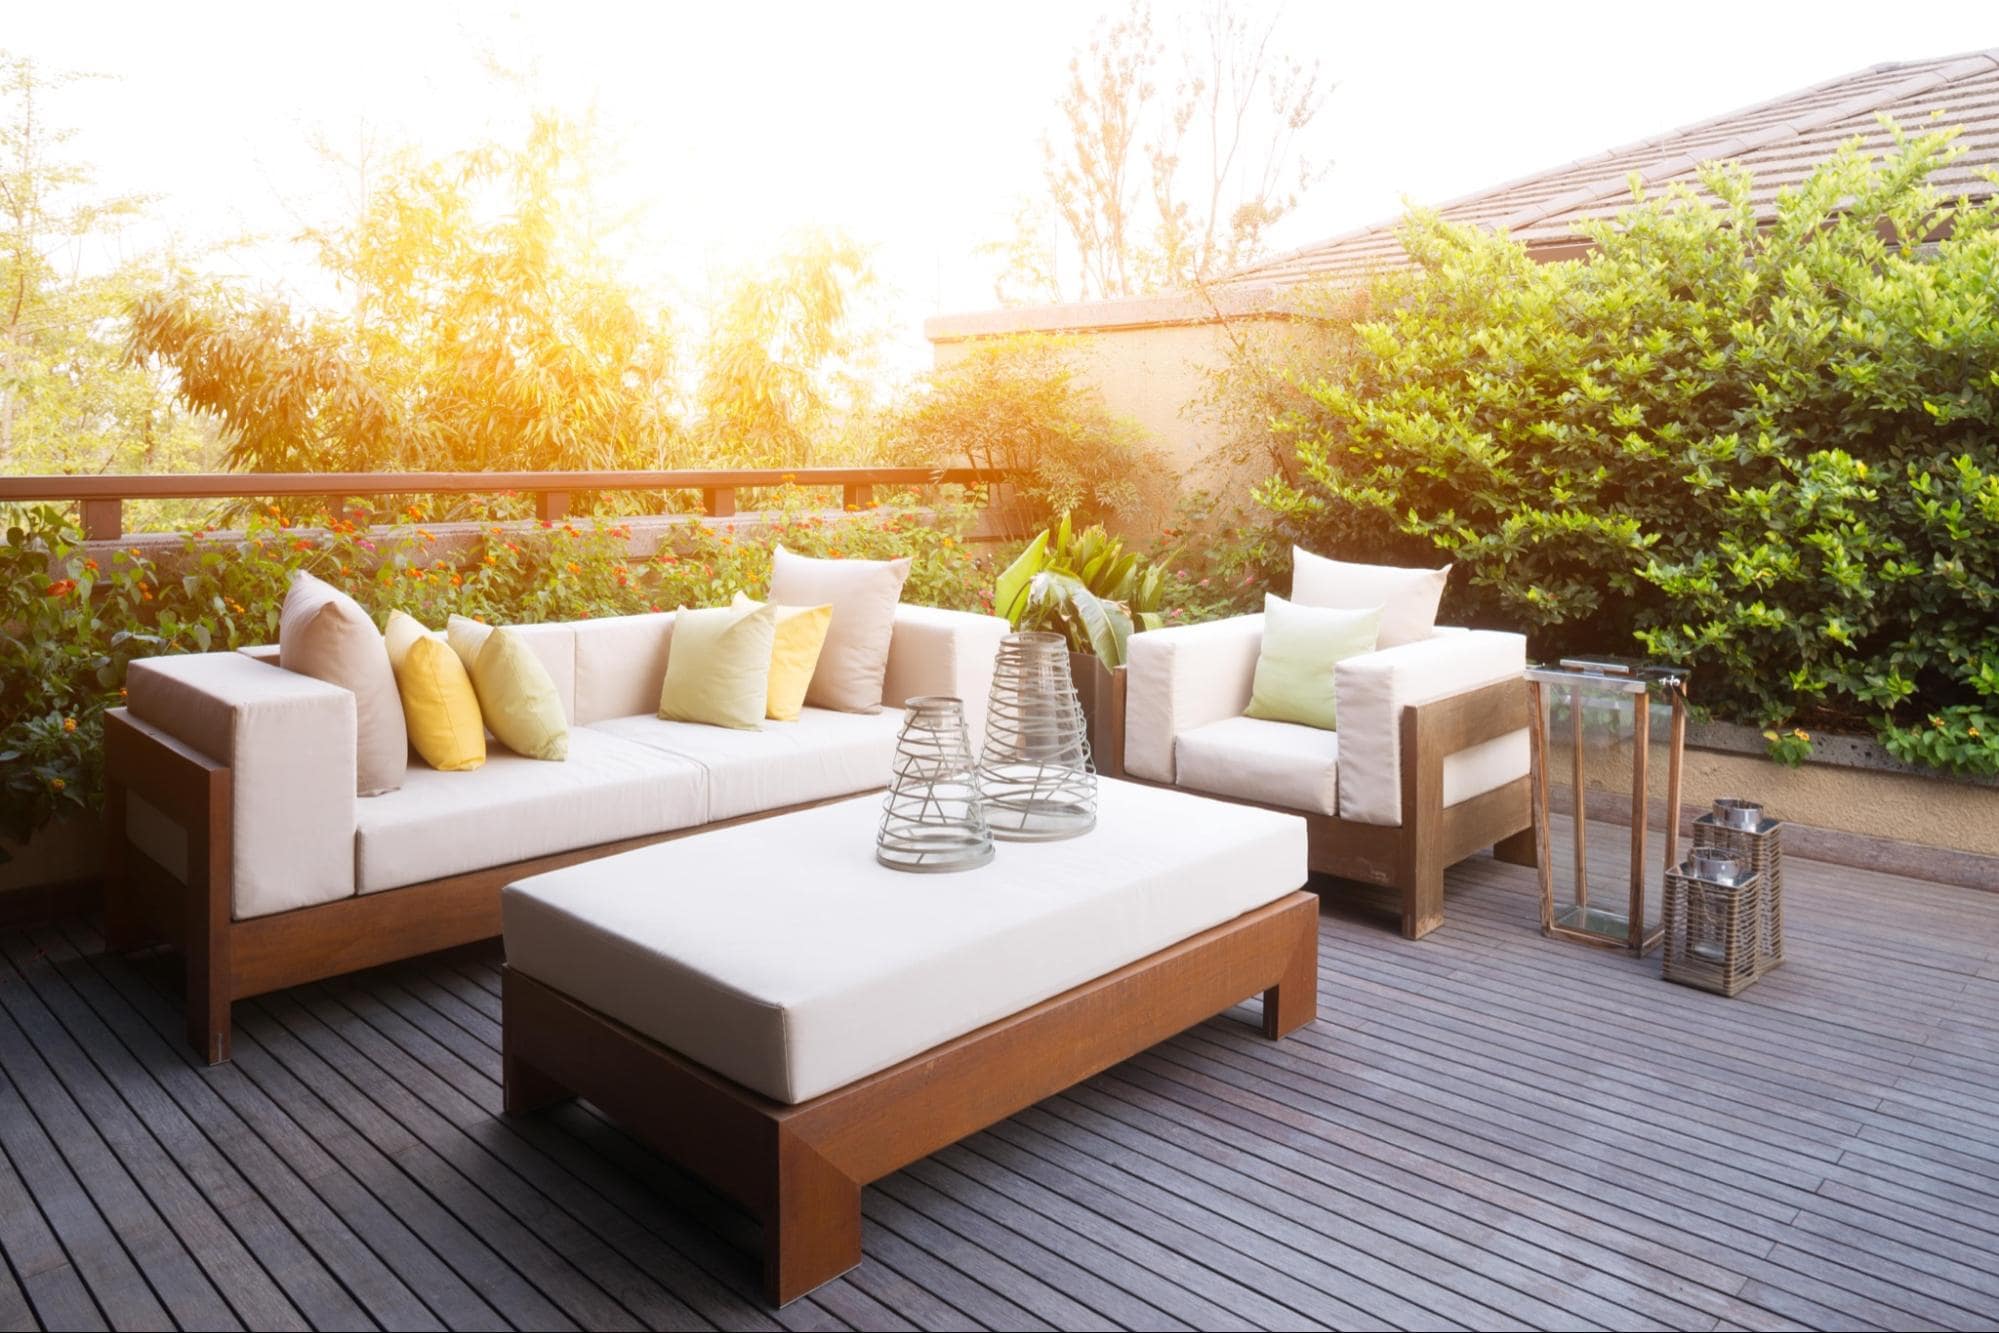 A picture of a rooftop furniture with outdoor furniture.